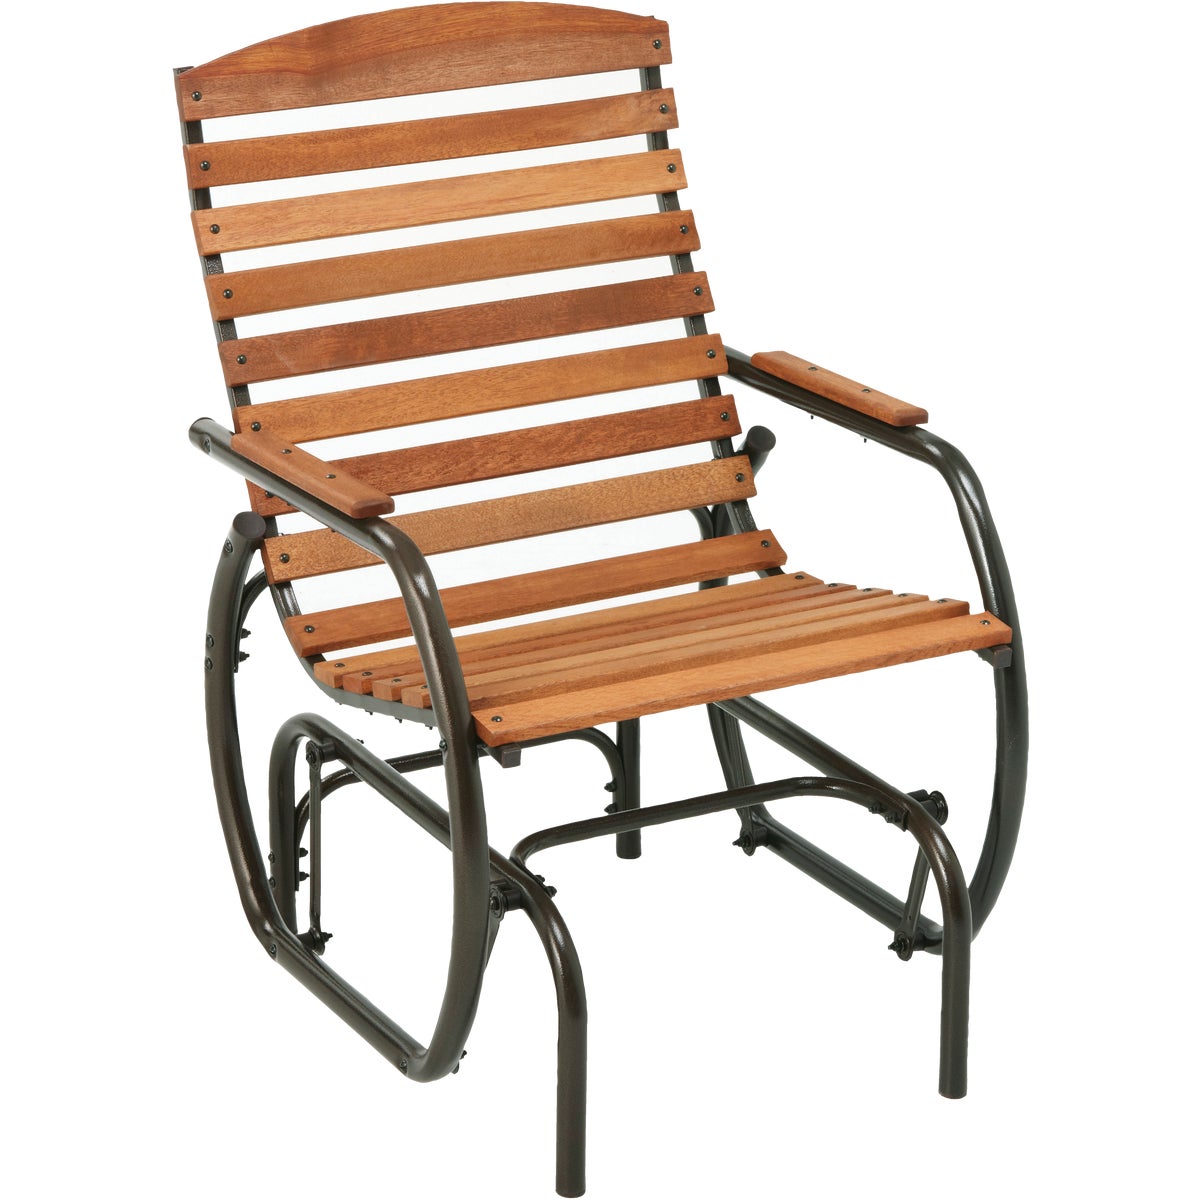 Item 817129, Gliding Country Garden seat provides a gentle, comfortable glide.